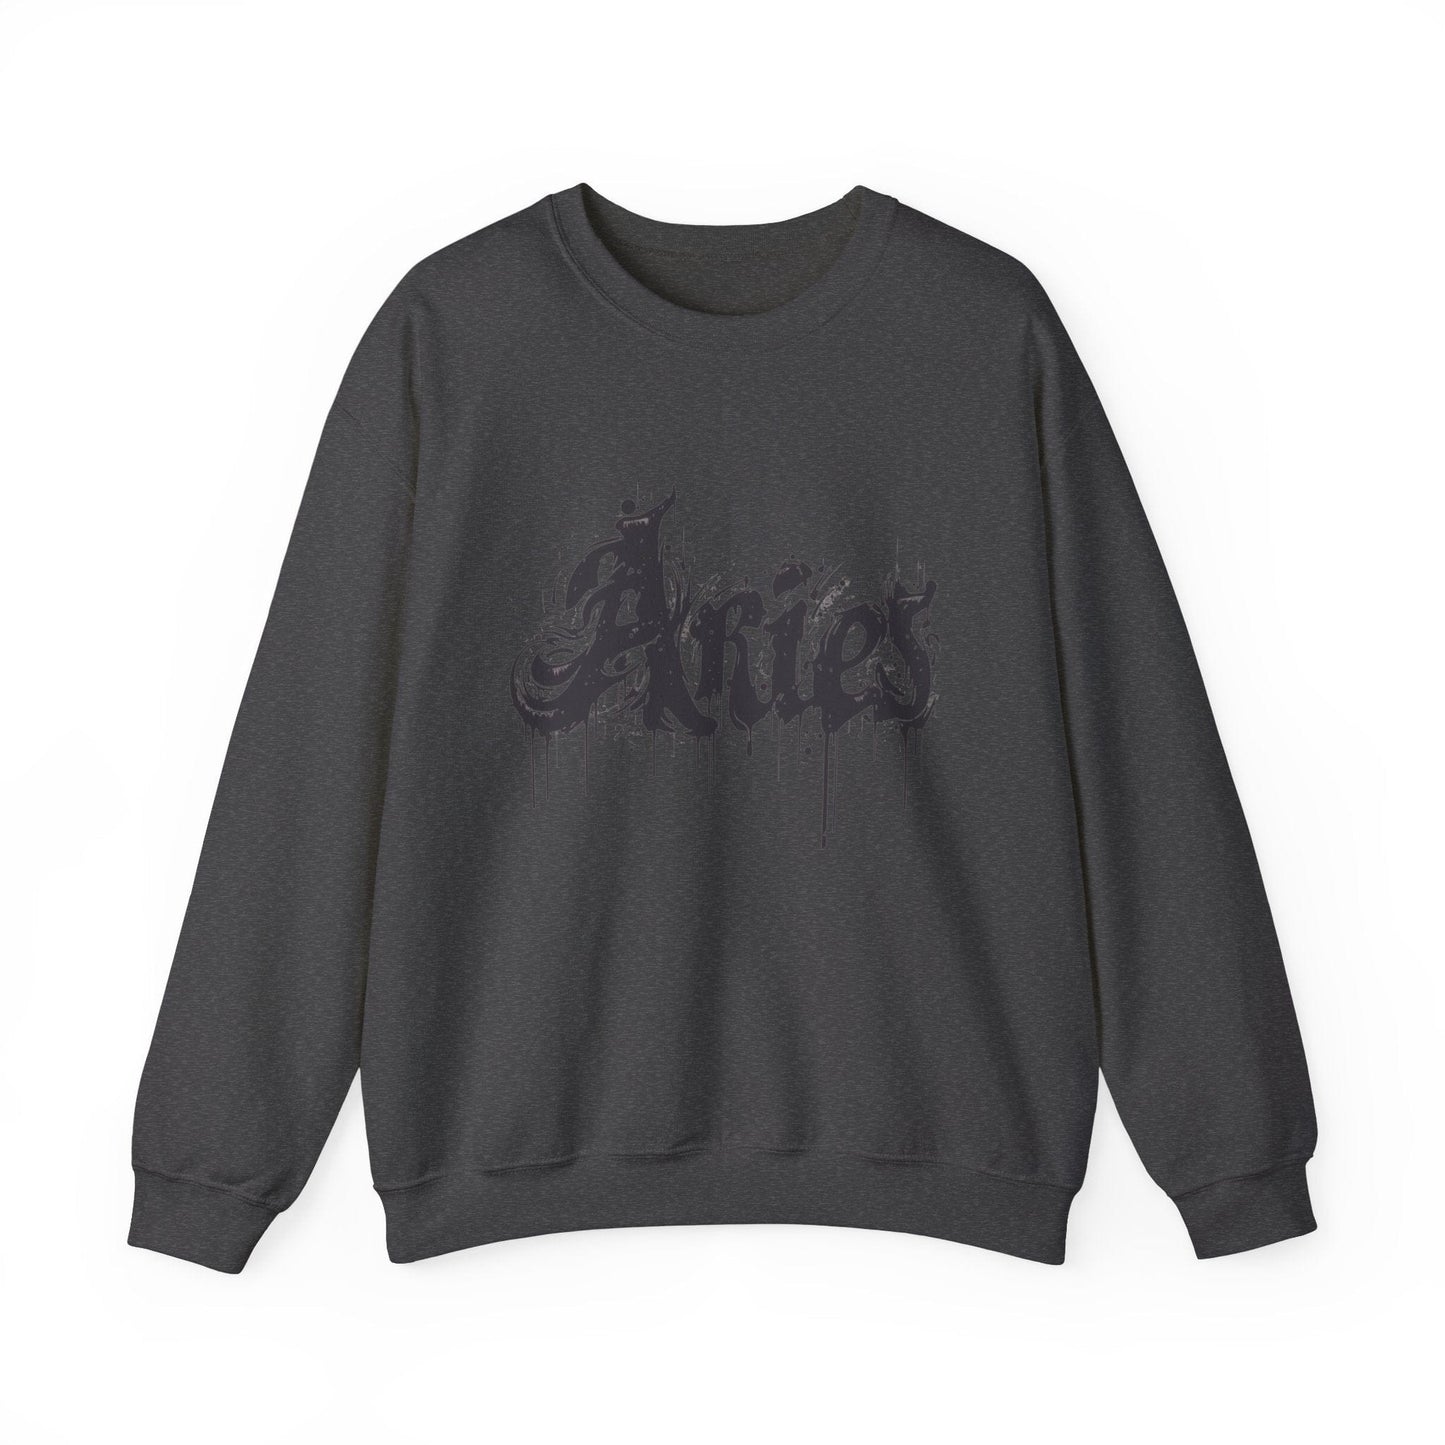 Sweatshirt S / Dark Heather Ink-Dripped Aries Energy Soft Sweater: Embrace Your Fire